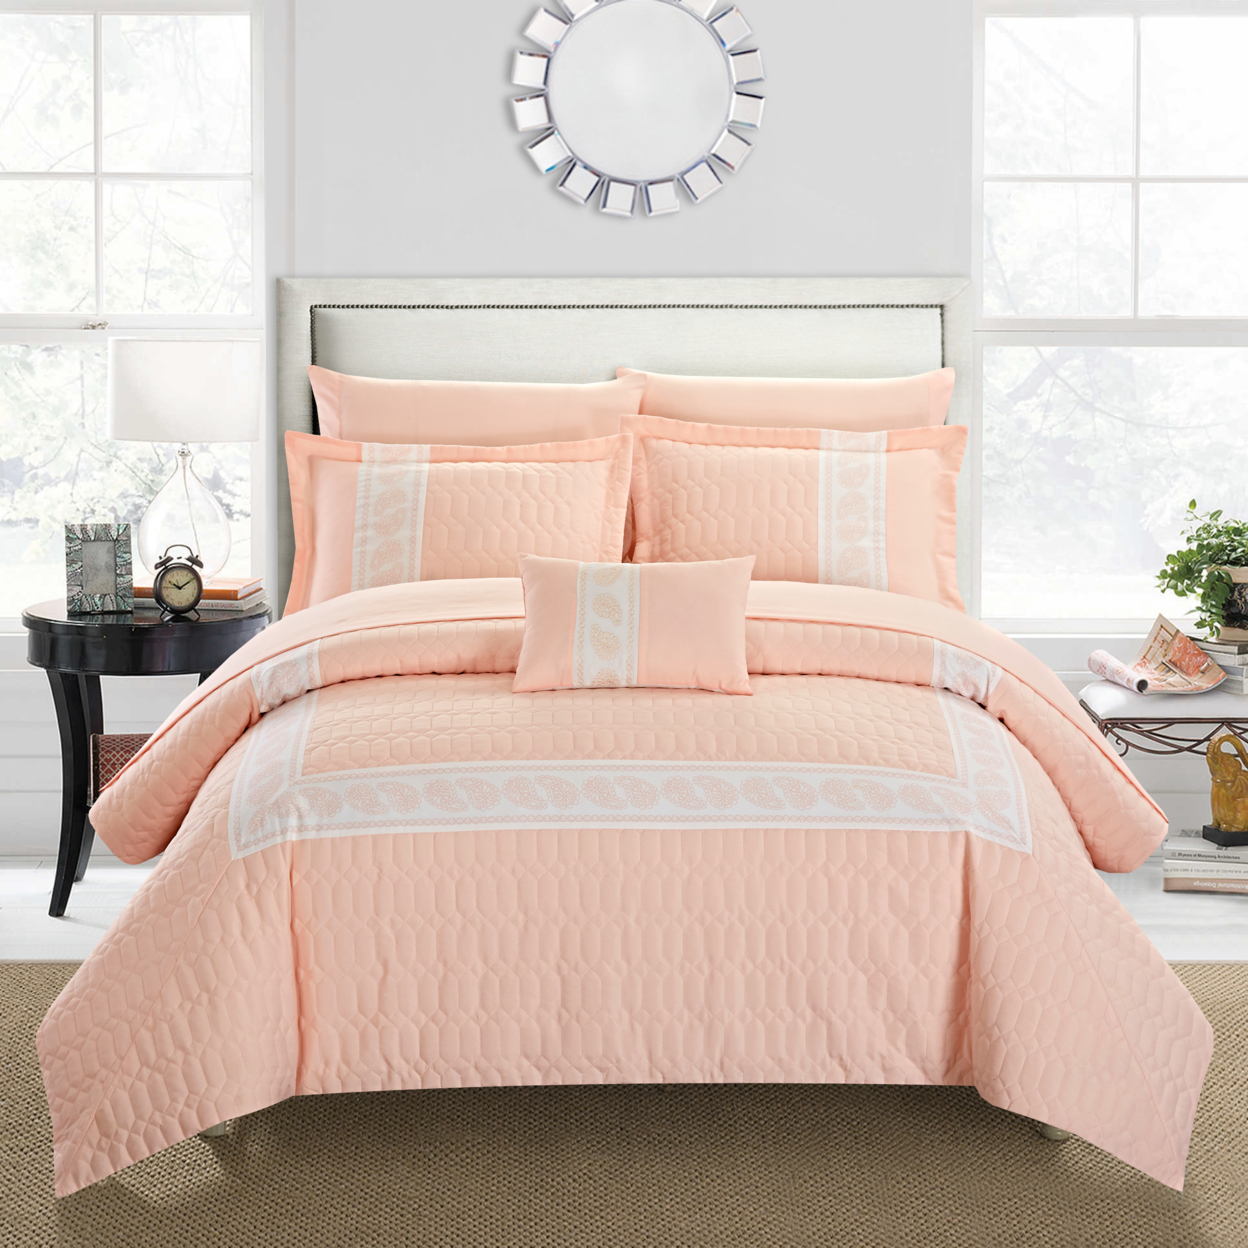 Keegan 8 Or 6 Piece Comforter Set Hotel Collection Hexagon Embossed Paisley Print Border Design Bed In A Bag - Blush, King